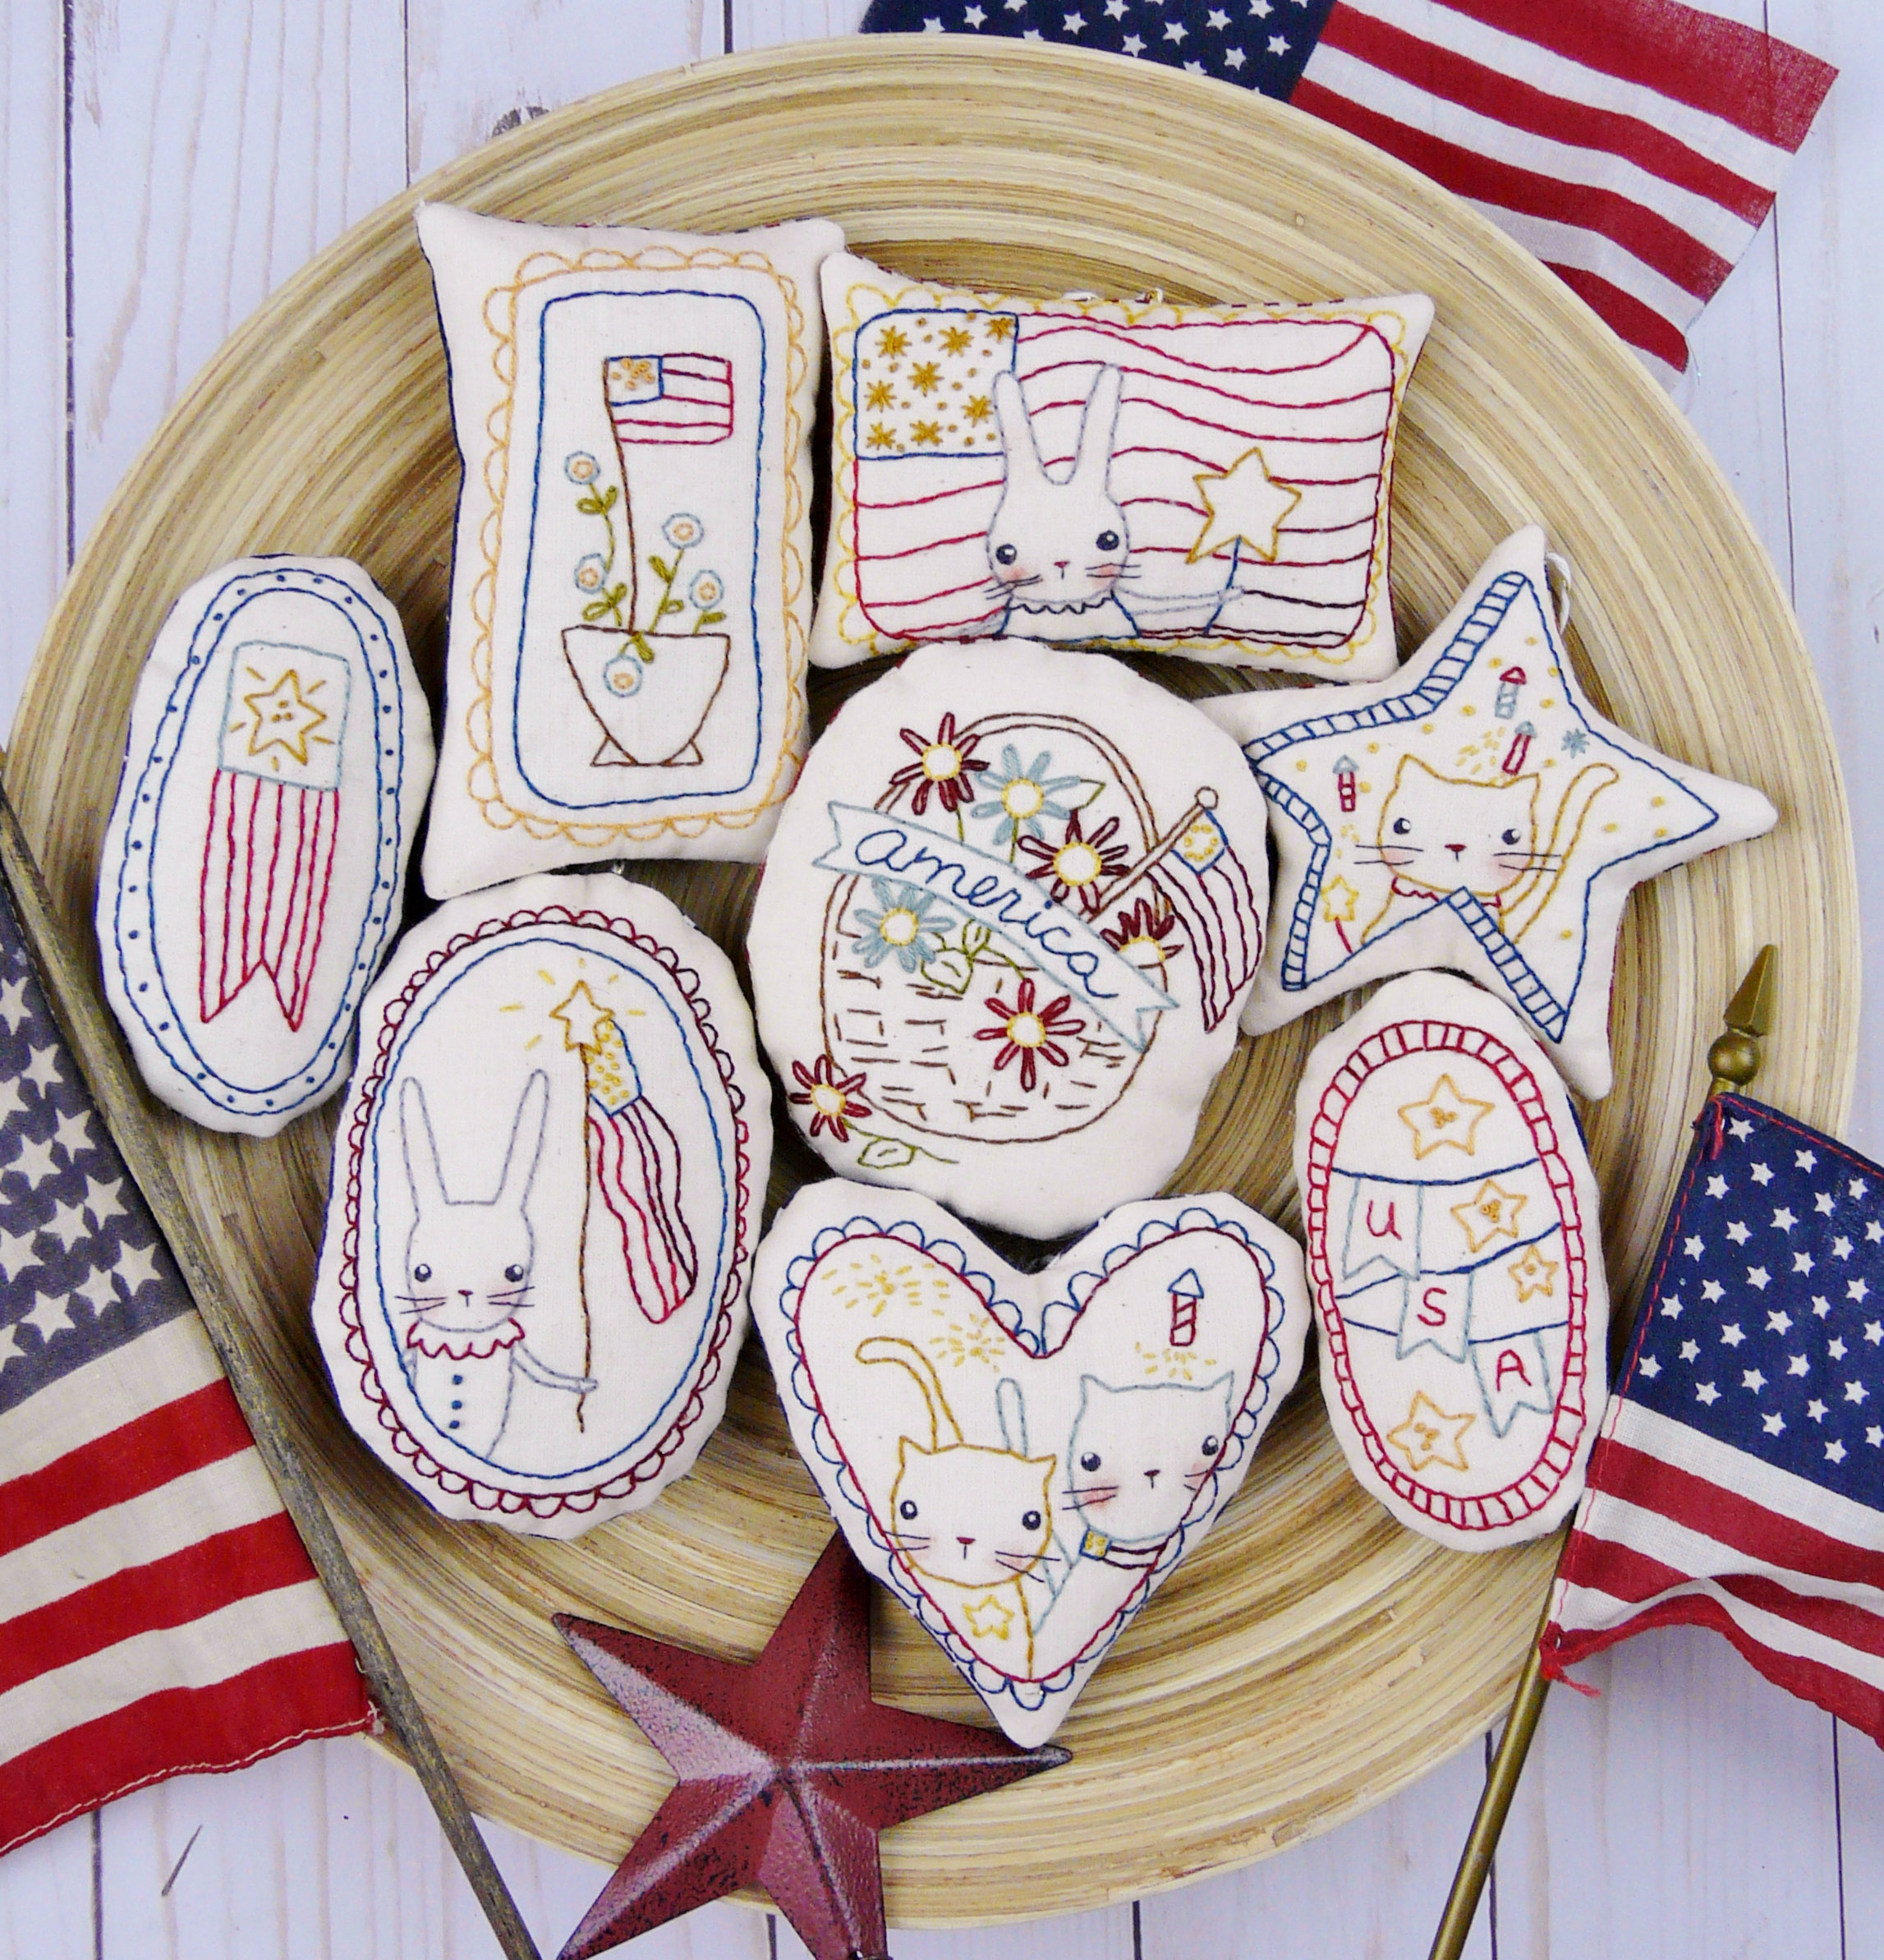 Primitive Hand Embroidery Patterns Patriotic Spirit Ornaments Embroidery Pattern Pdf Stitchery Independence Day Primitive Ornies Bowl Fillers Hudsons Holidays